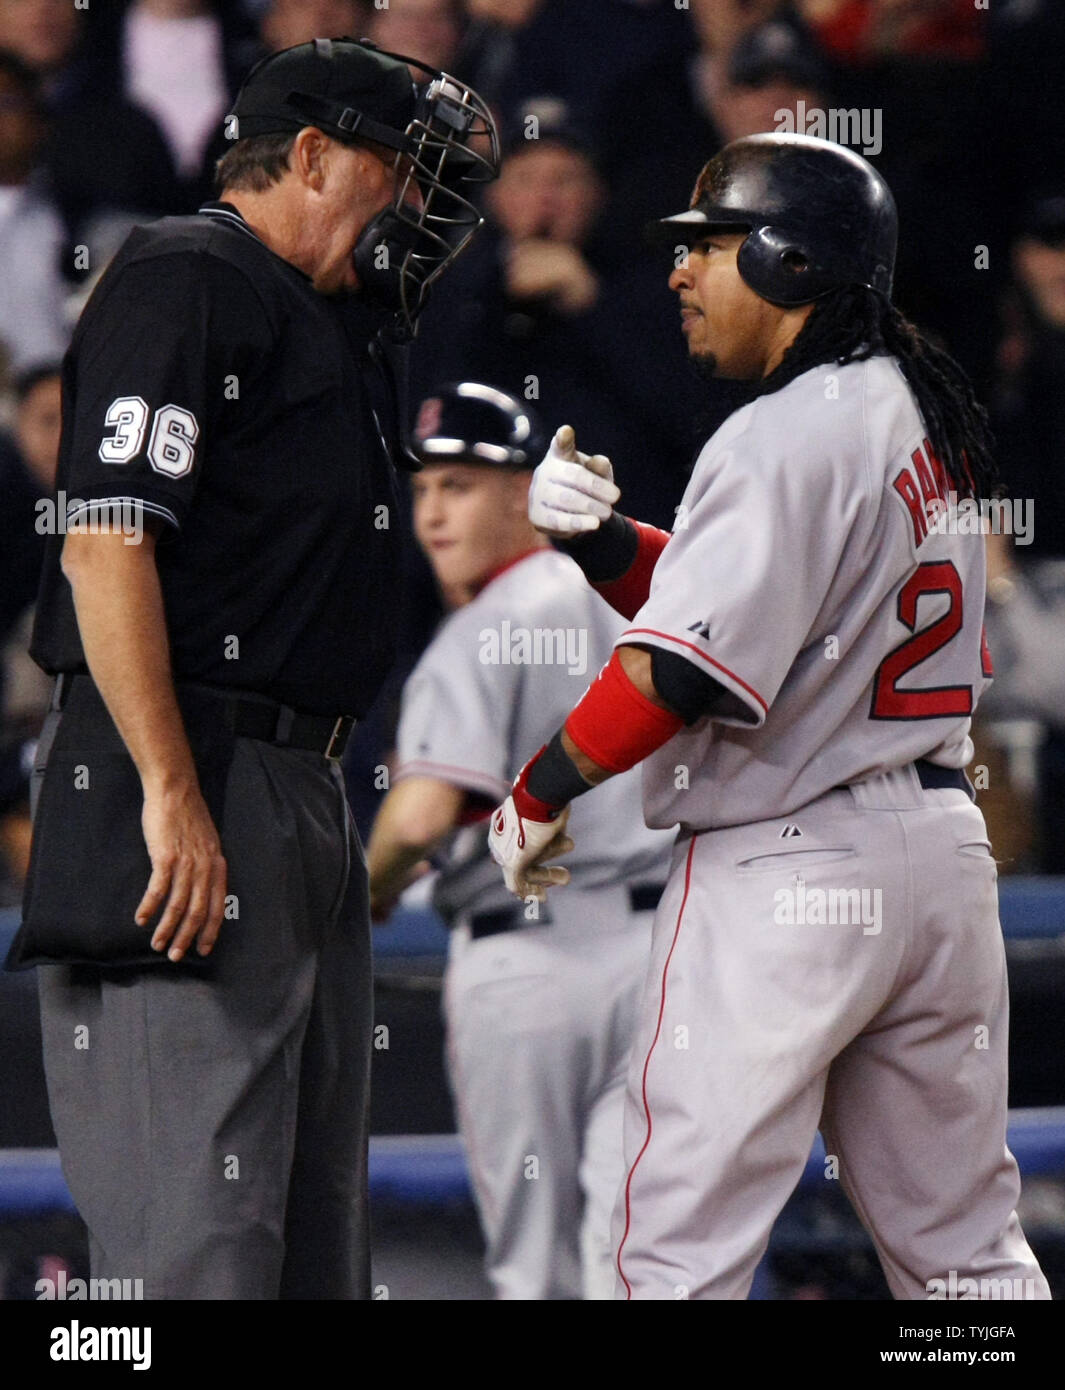 Chicago Cubs manager Lou Piniella (R) argues with home plate umpire Ed  Rapuano (C) after Rapuano ejected Jim Edmonds for arguing ball and strikes  during the 11th inning against the Milwaukee Brewers